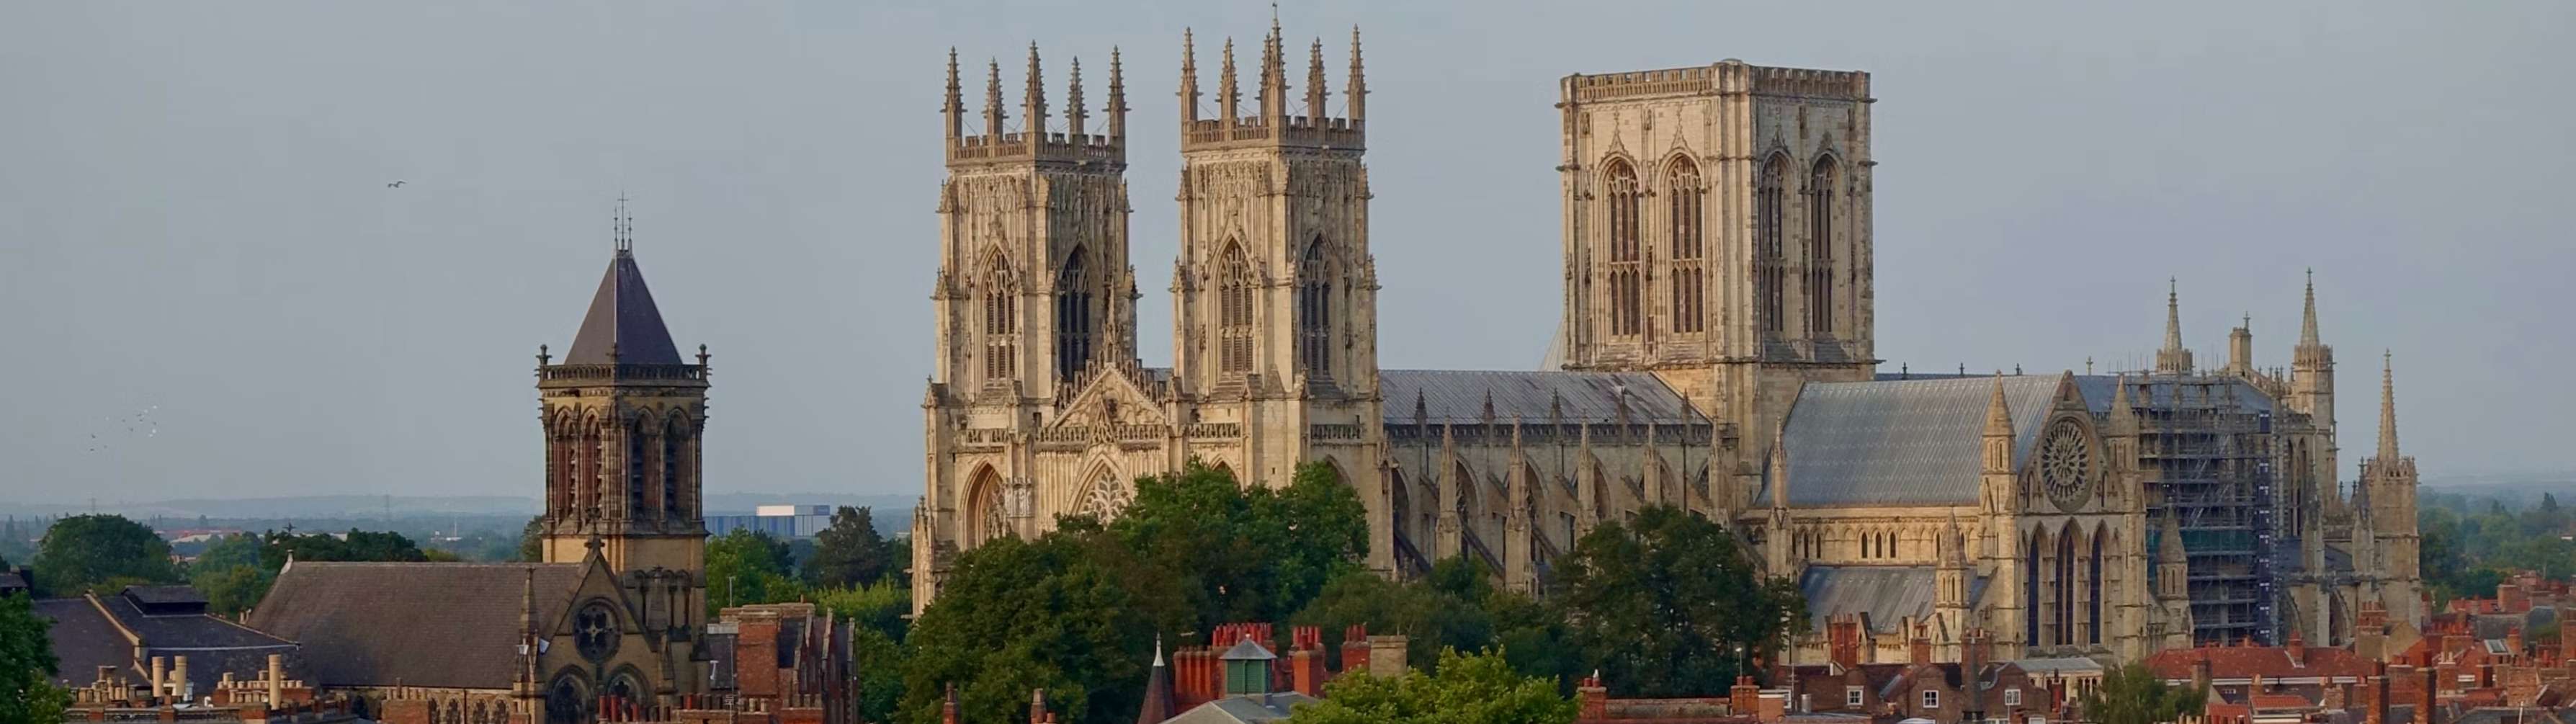 The world-famous York Minster building against an overcast sky in the historic city of York.